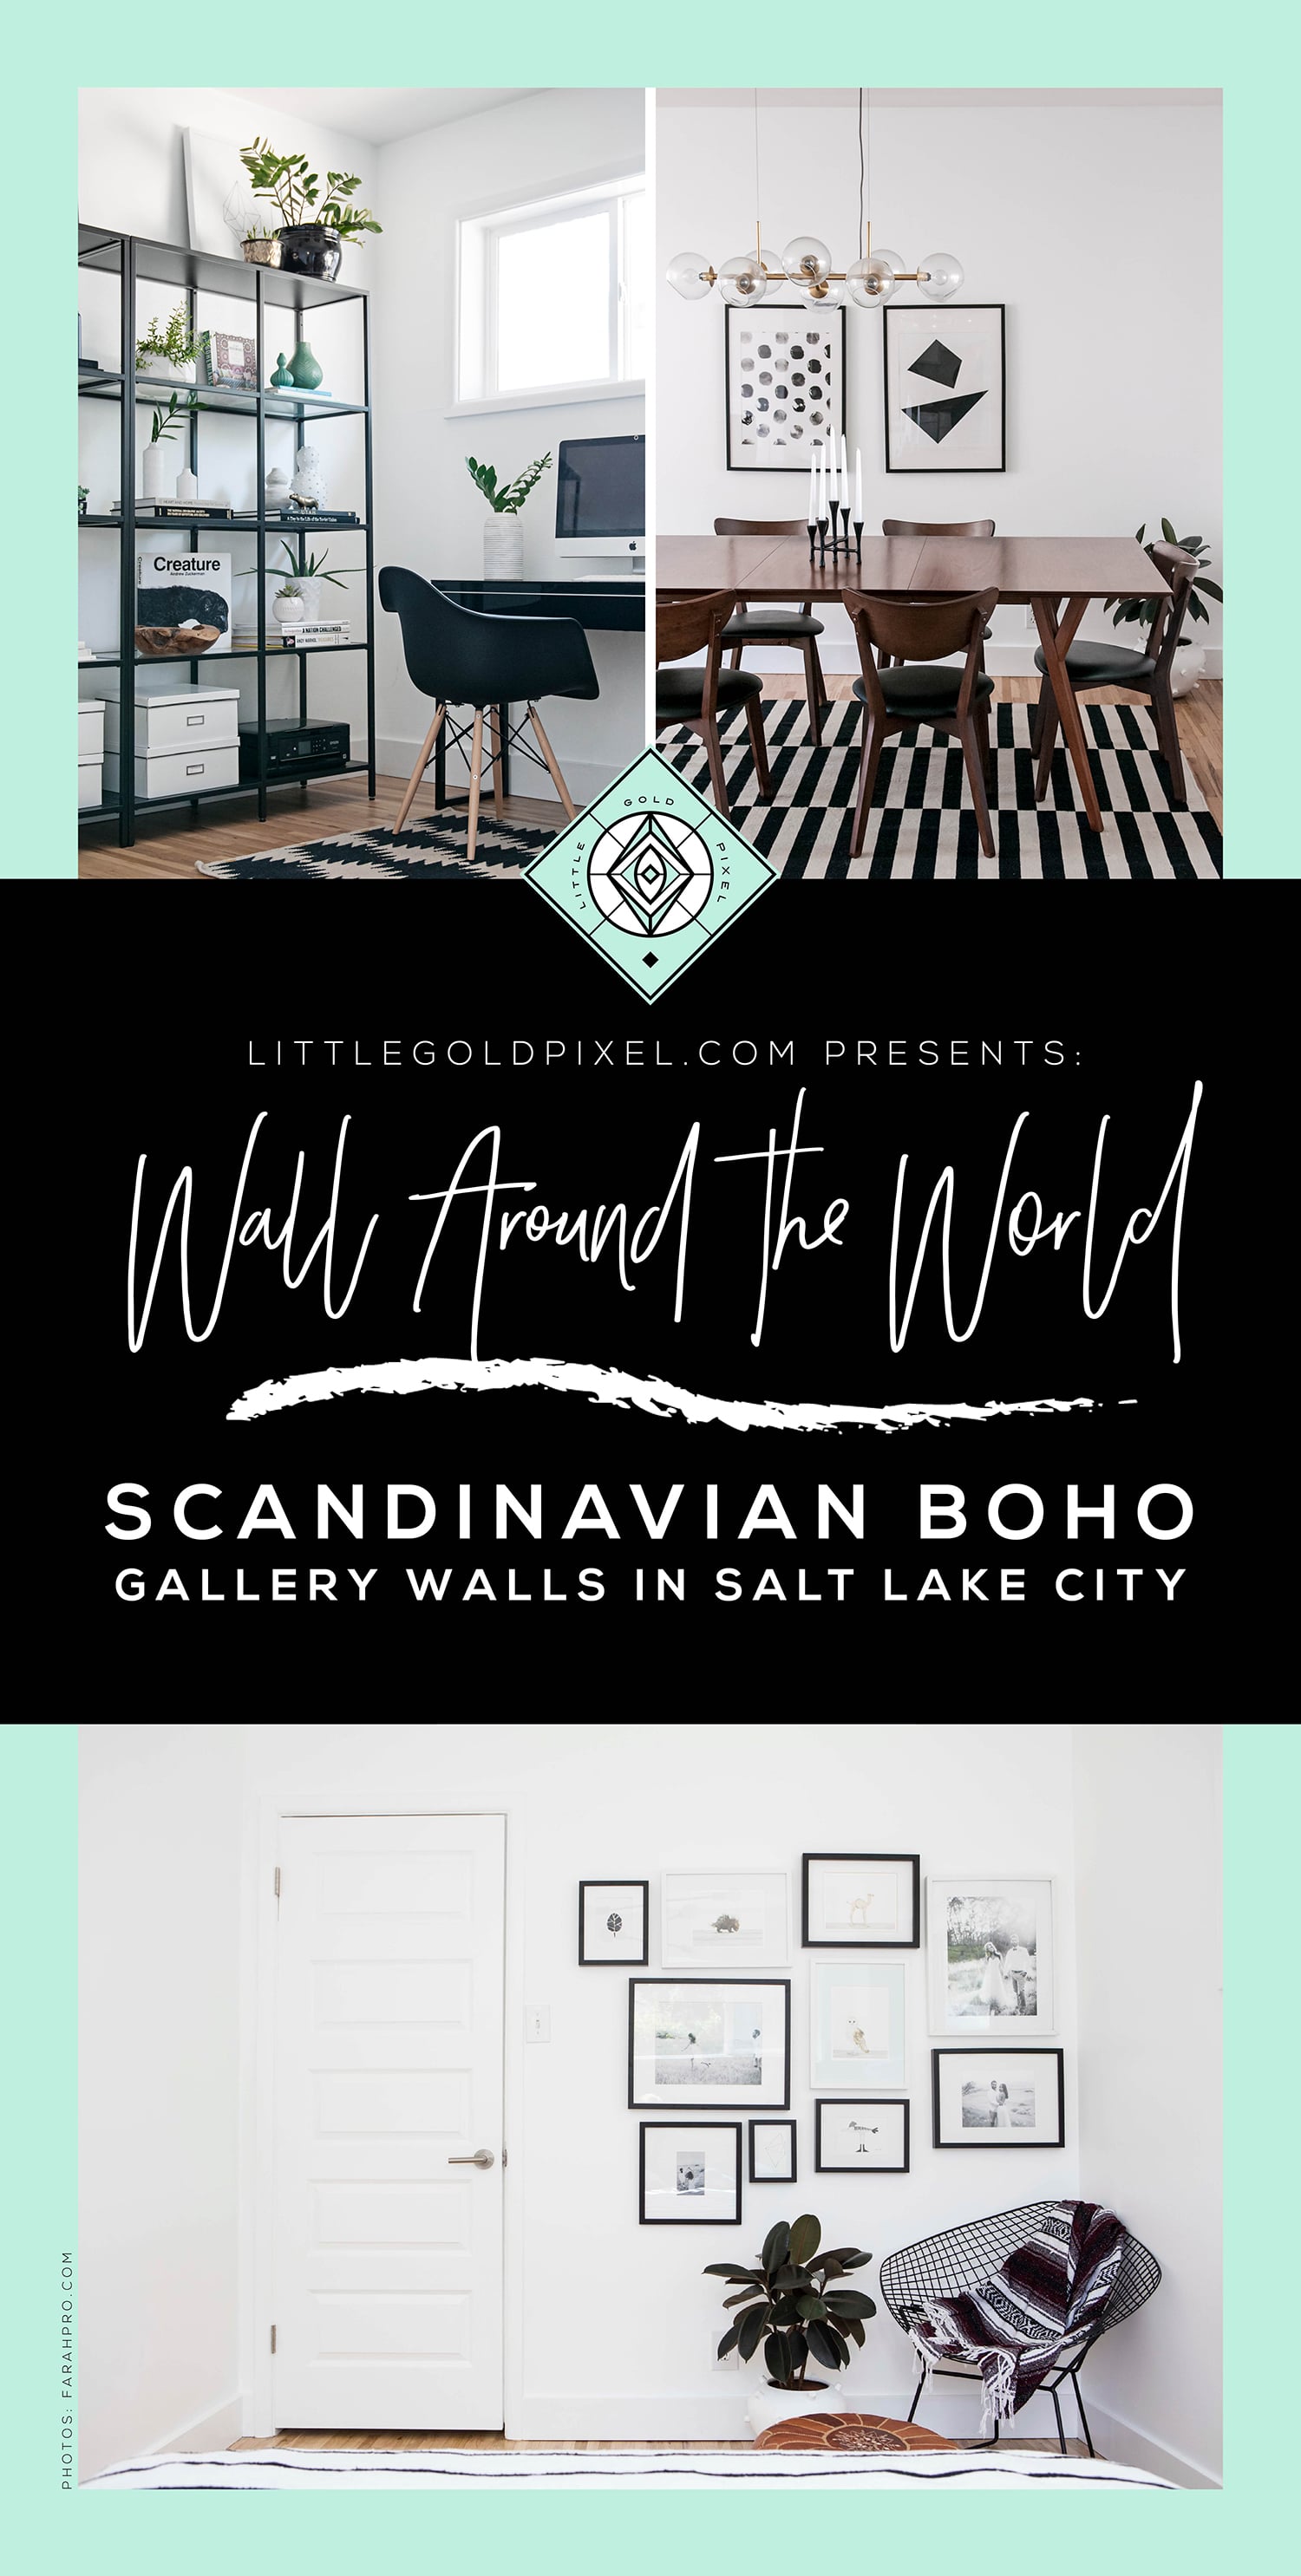 Wall Around the World: A Gallery Wall Series by Little Gold Pixel • Part 9: Scandinavian Boho Gallery Walls in Utah